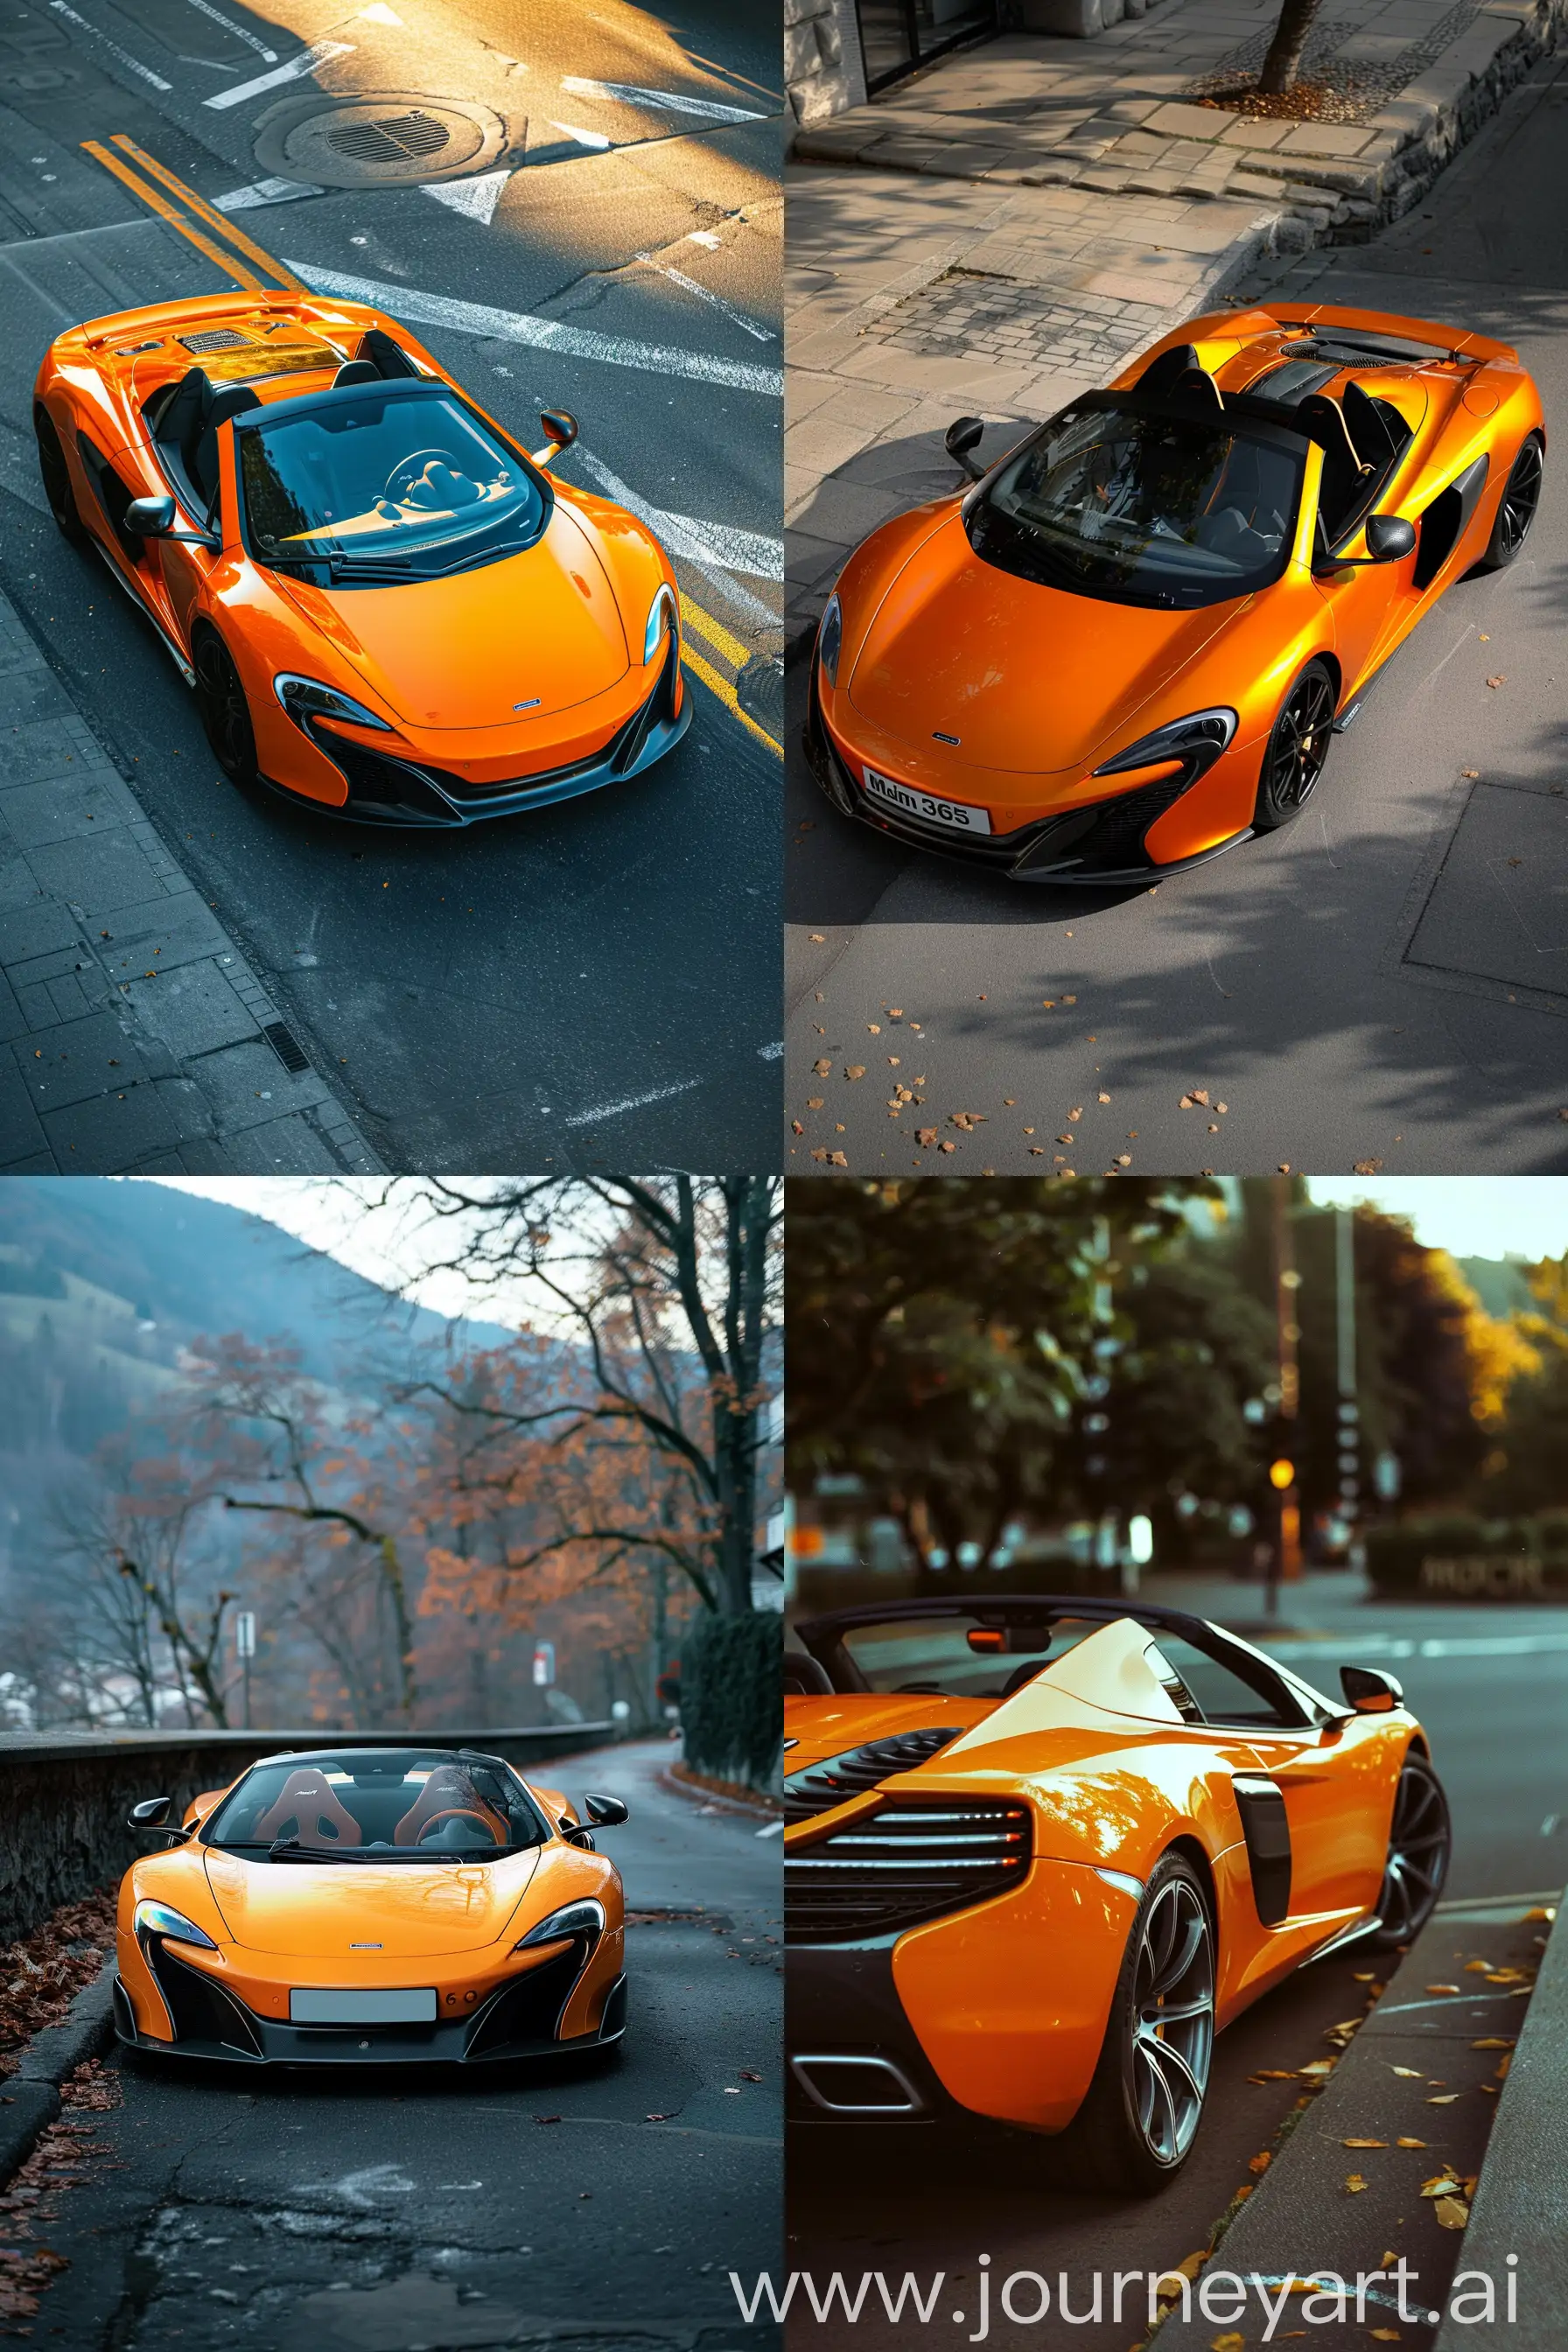 Vibrant-McLaren-650s-Spider-in-Golden-Orange-from-a-Striking-High-Angle